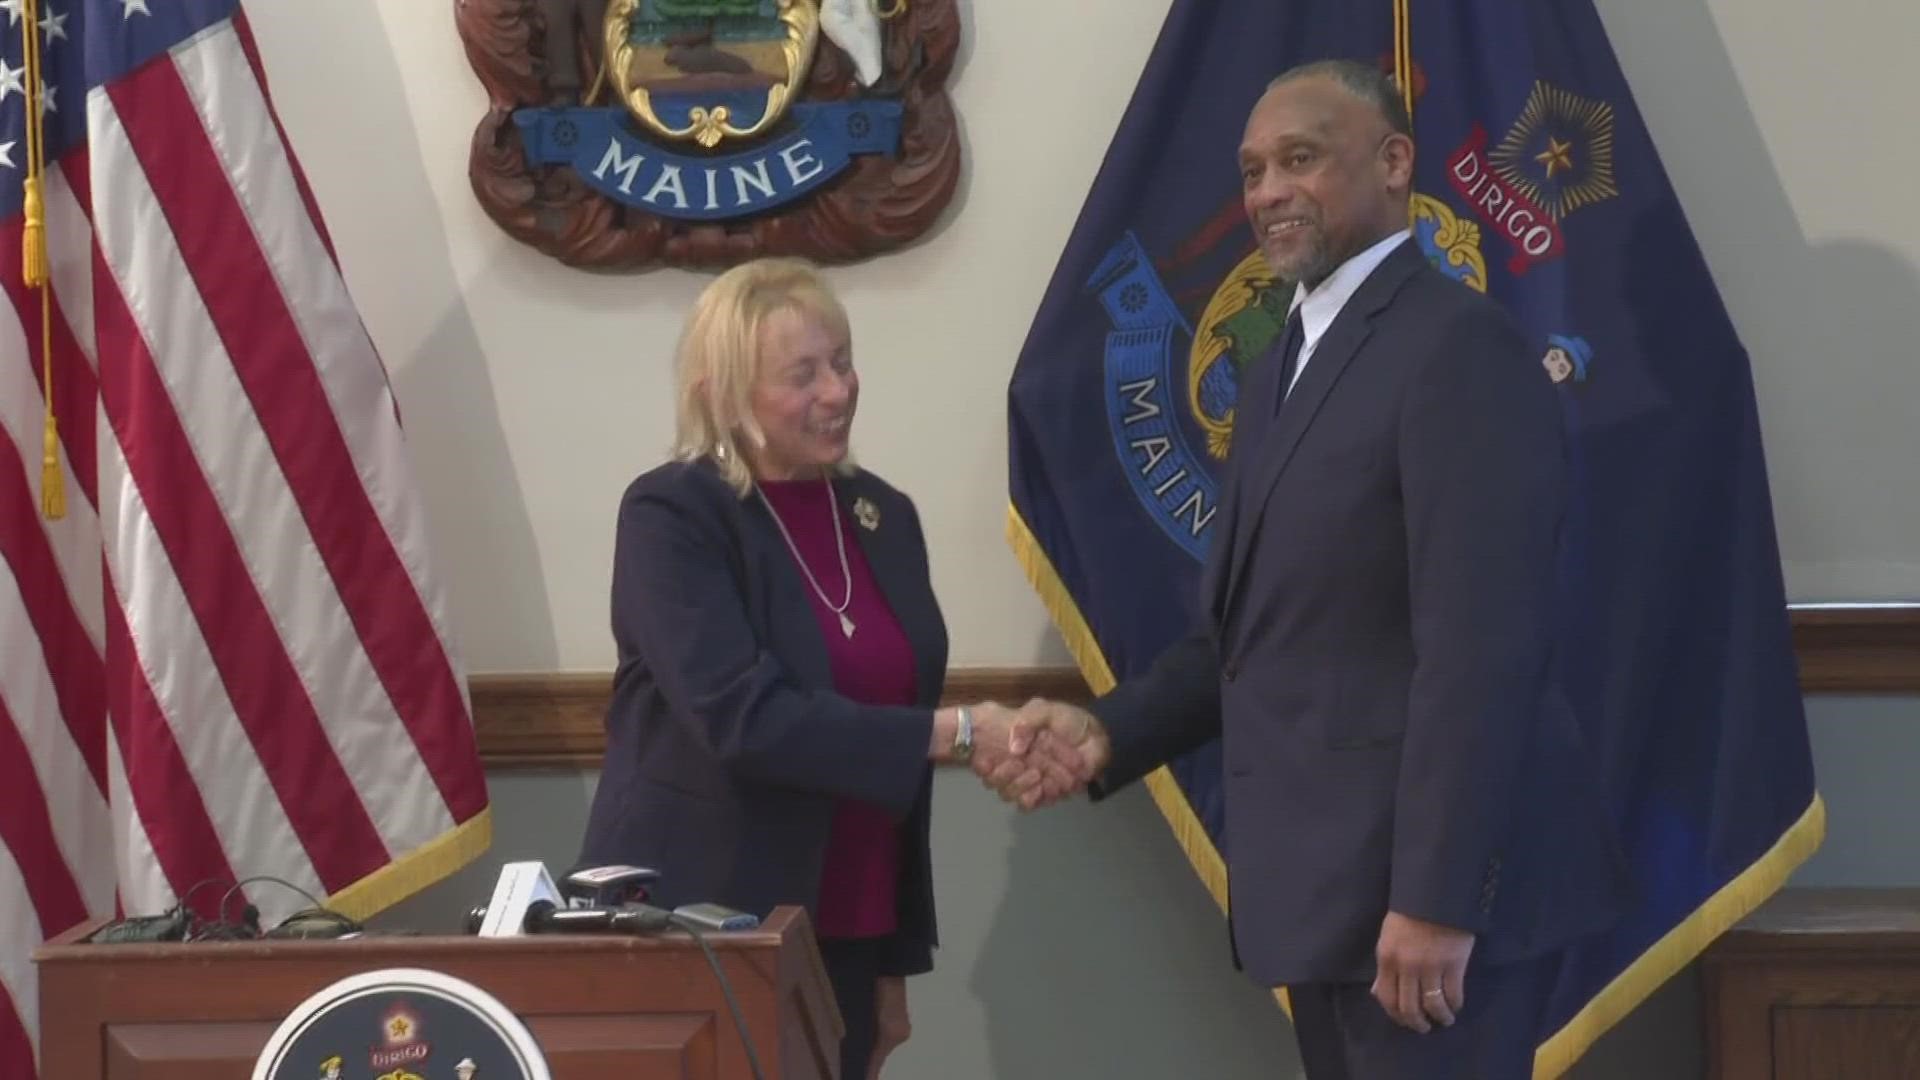 Rick Lawrence served as a district court judge in Maine for 22 years before becoming the state's first Black associate justice for Maine's highest court.